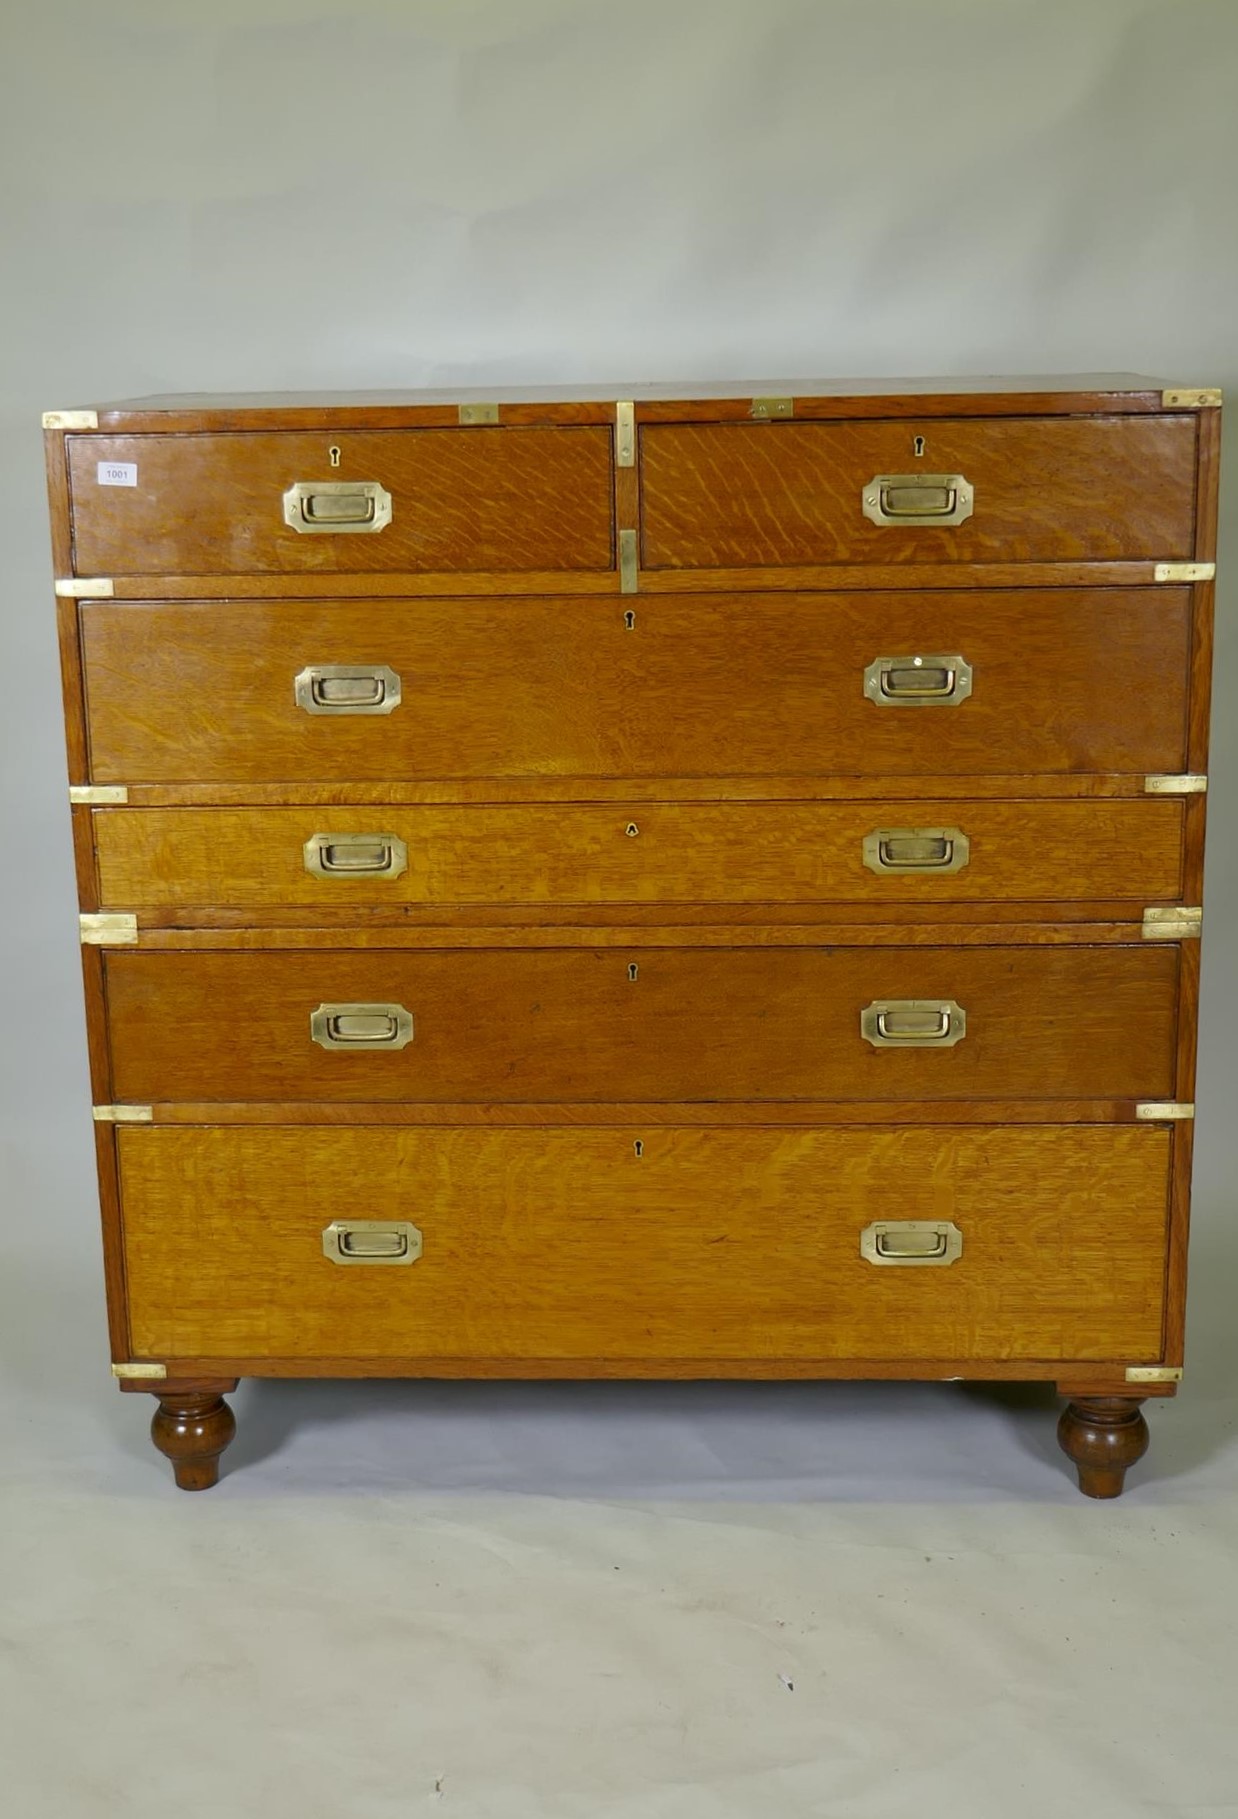 A fine late C19th/early C20th golden oak secretaire campaign style chest of two sections, the - Image 2 of 9